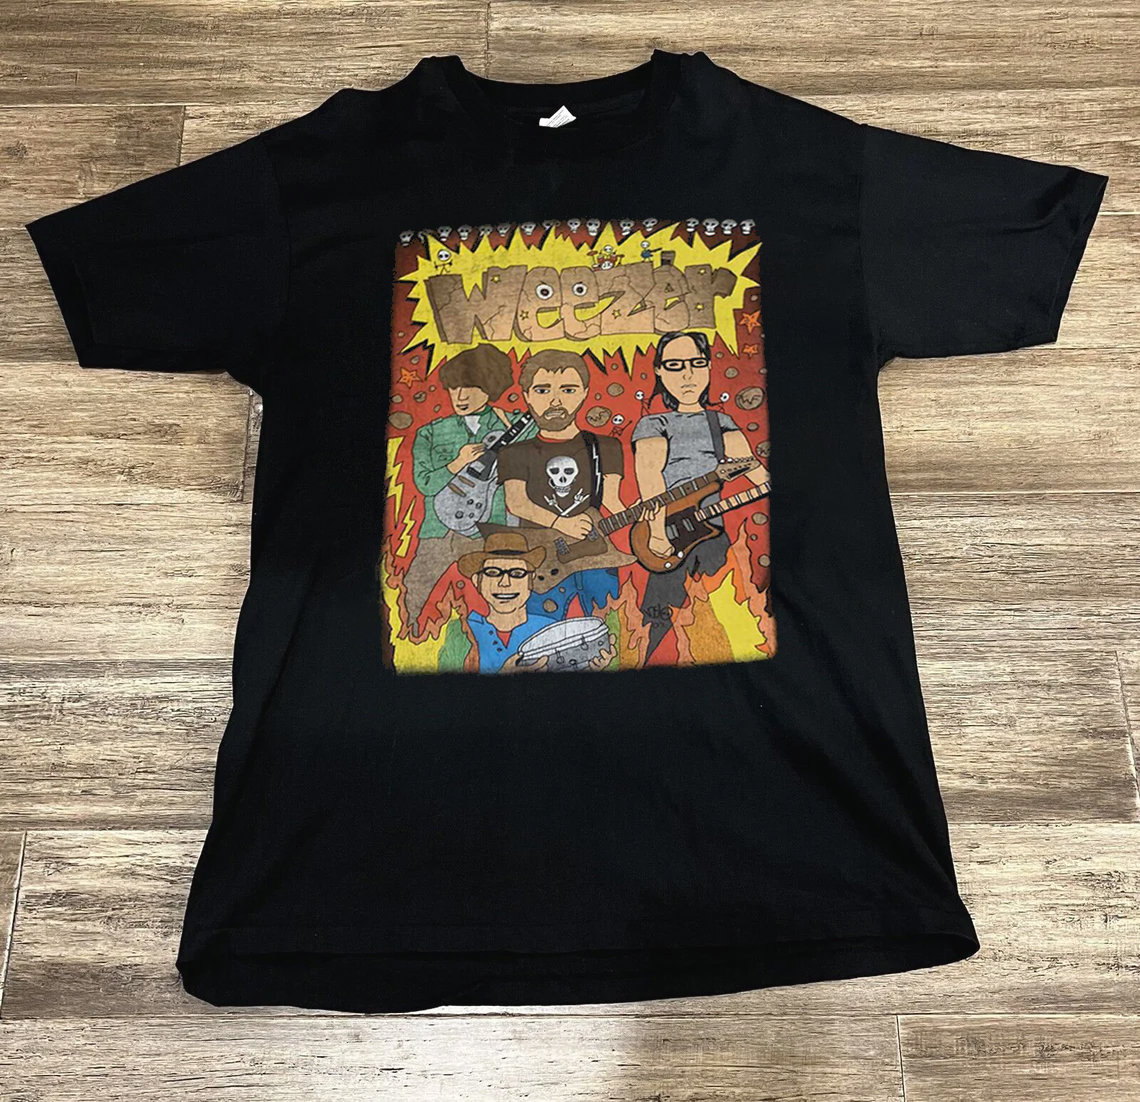 Discover Vintage Weezer Band T-Shirt